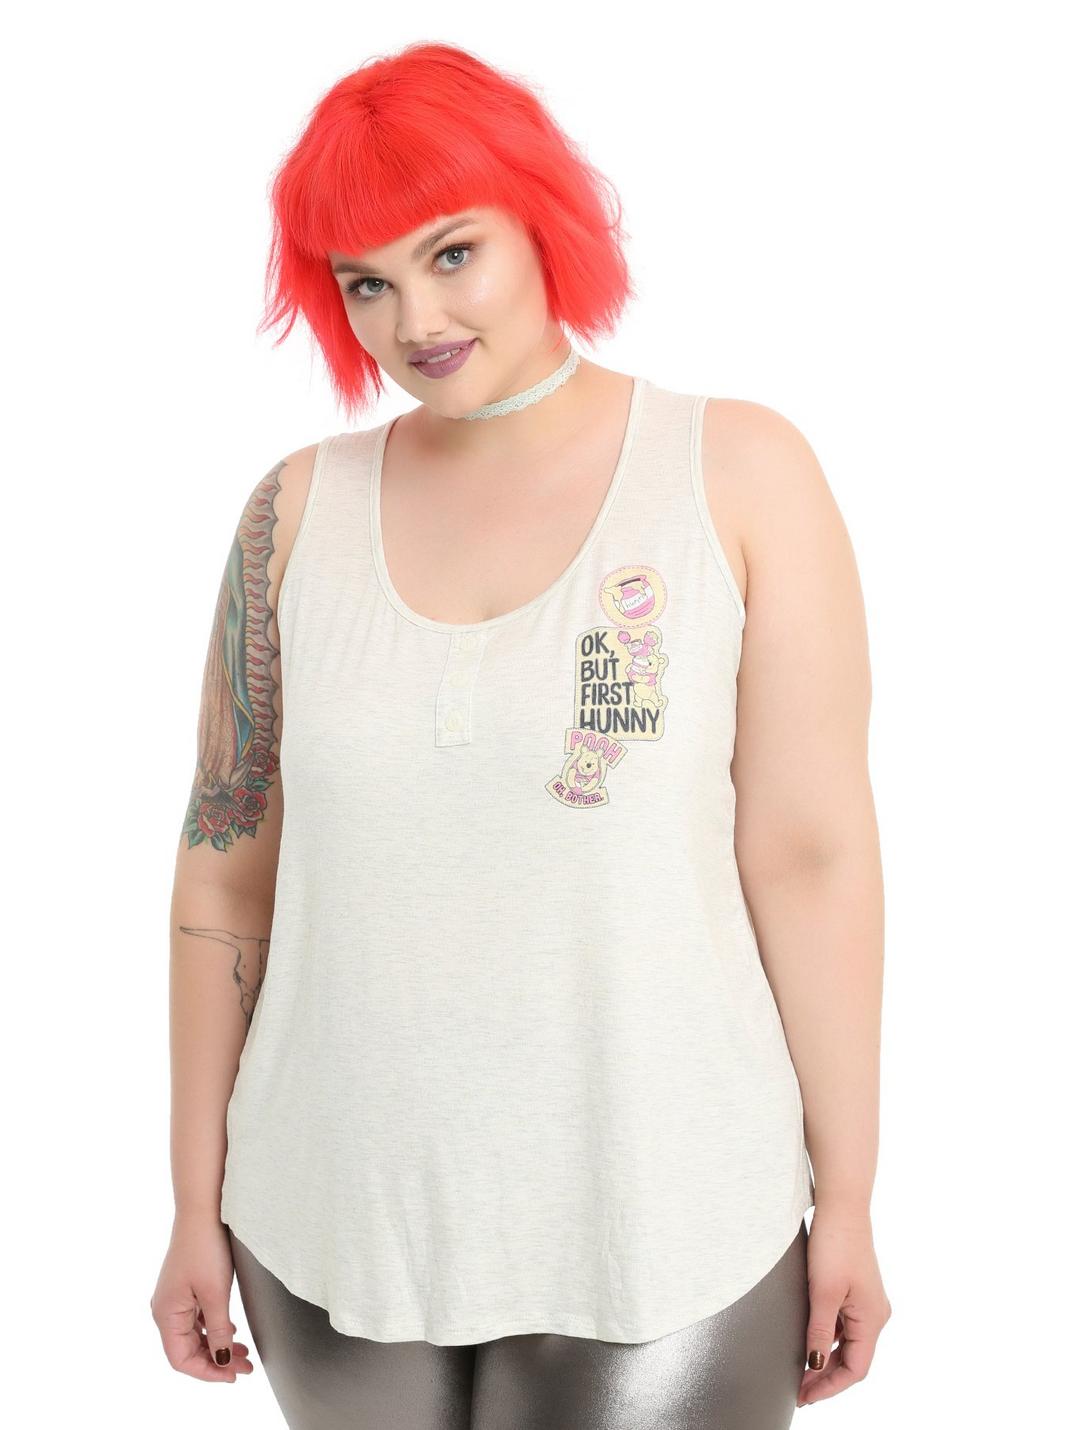 Disney Winnie The Pooh OK But First Hunny Patches Girls Tank Top Plus Size, WHITE, hi-res